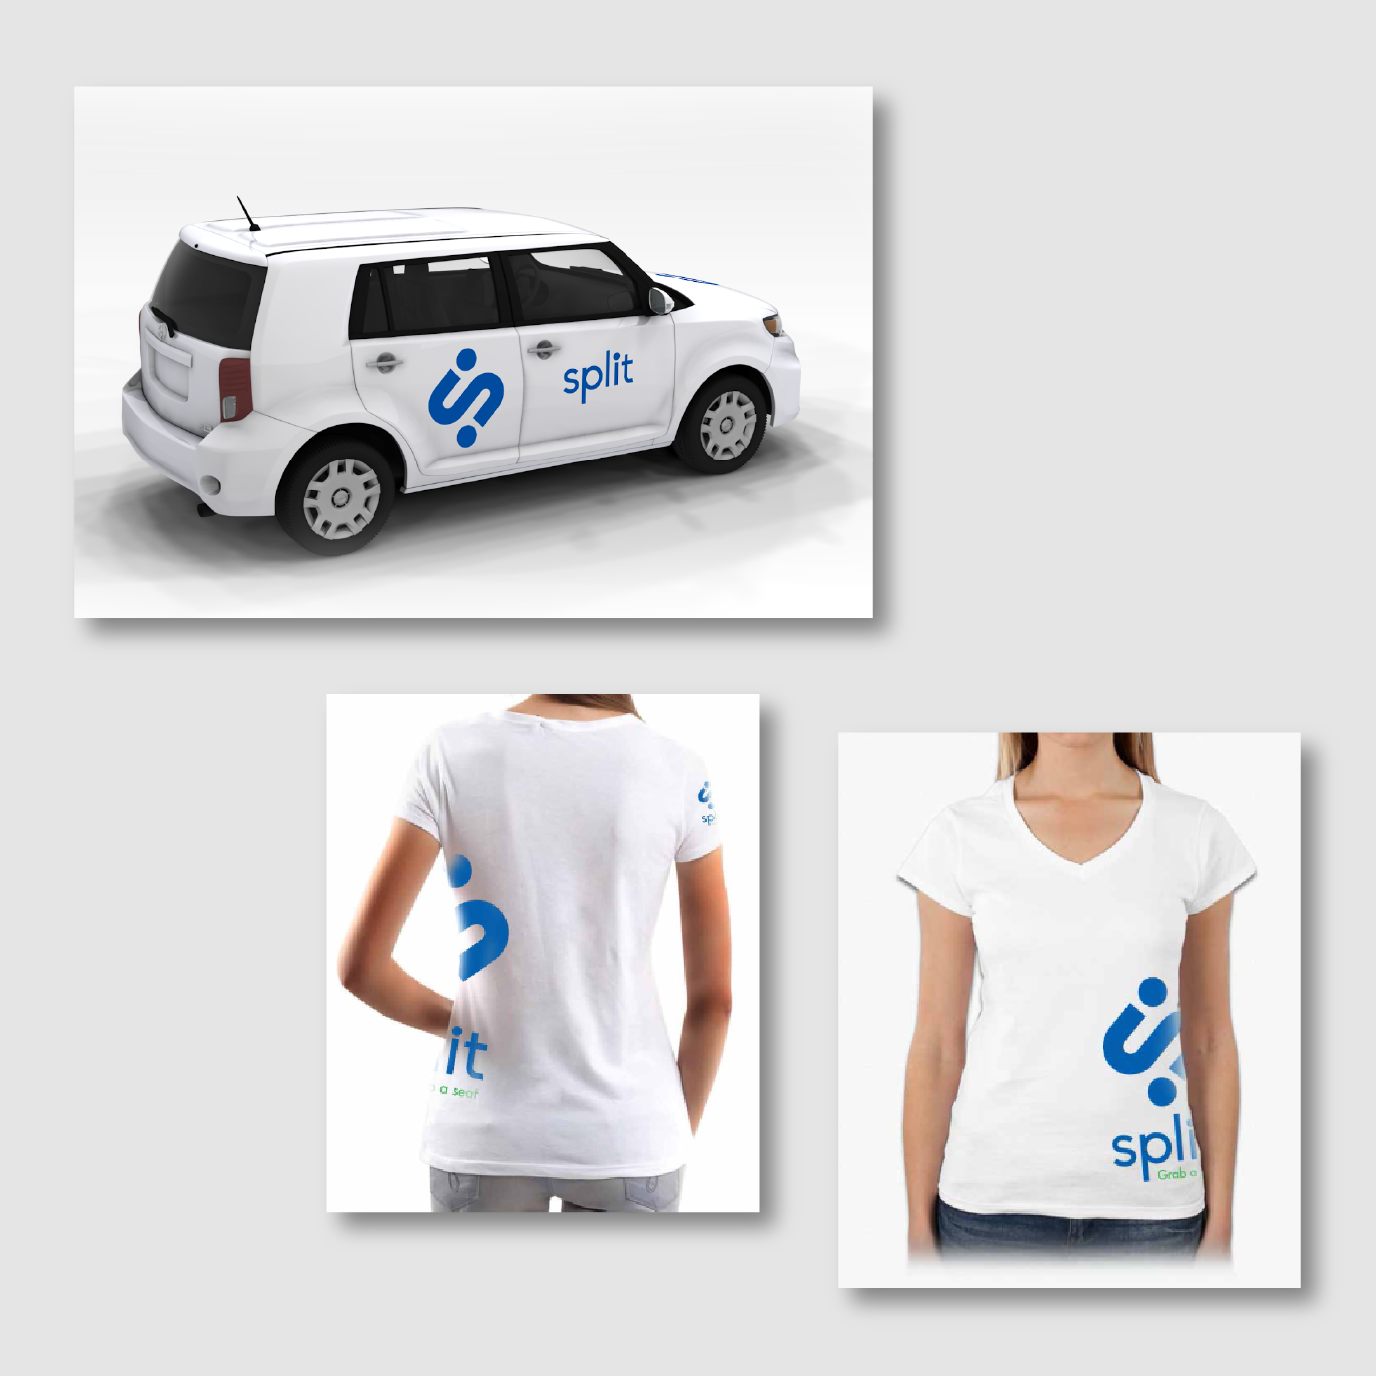 decal and shirt designs for split